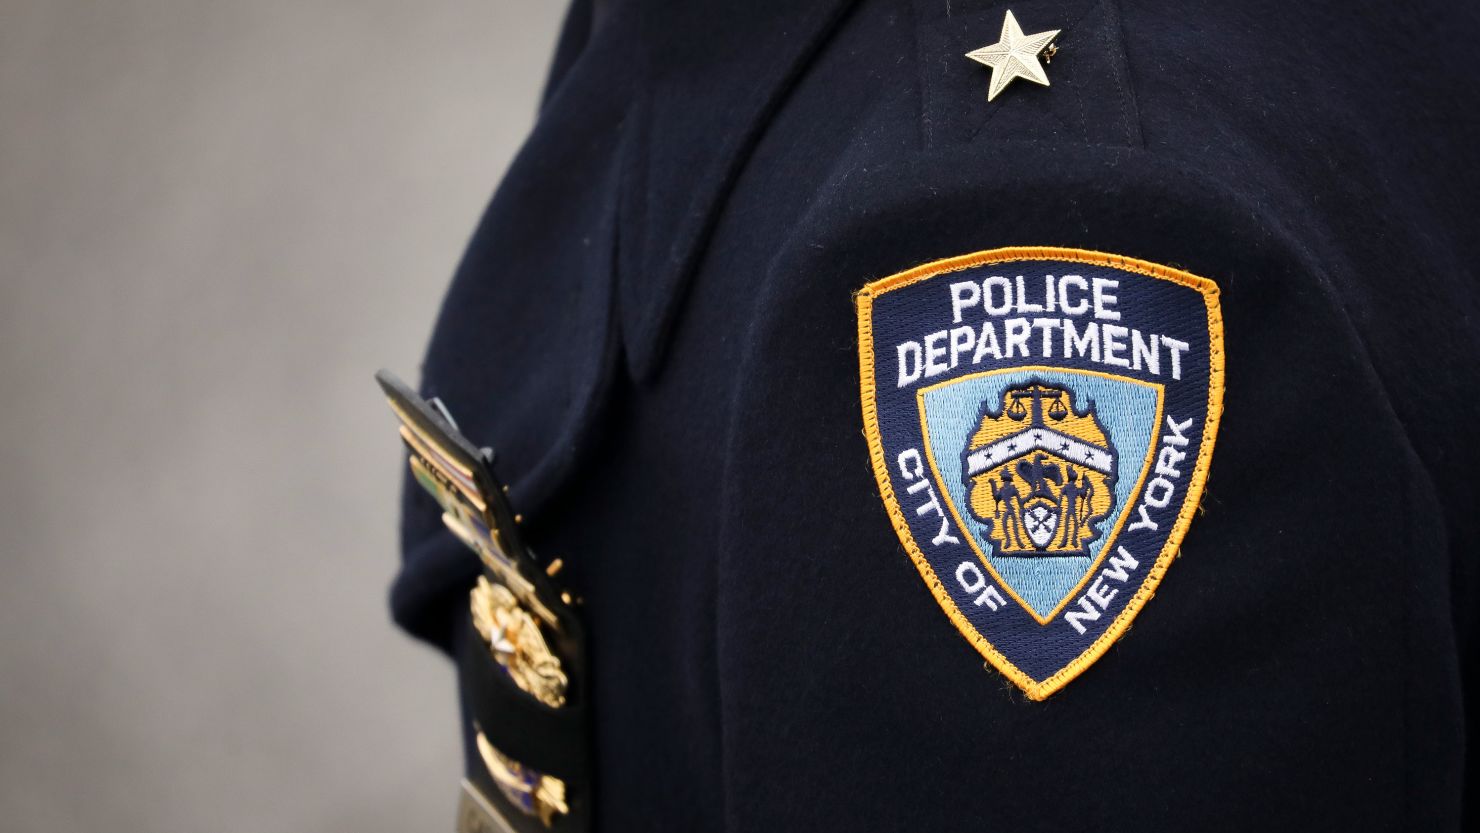 Overall, hate crimes in New York City have increased by 98% this year, compared with January through May of 2020, according to the latest New York Police Department (NYPD) crime statistics report. 